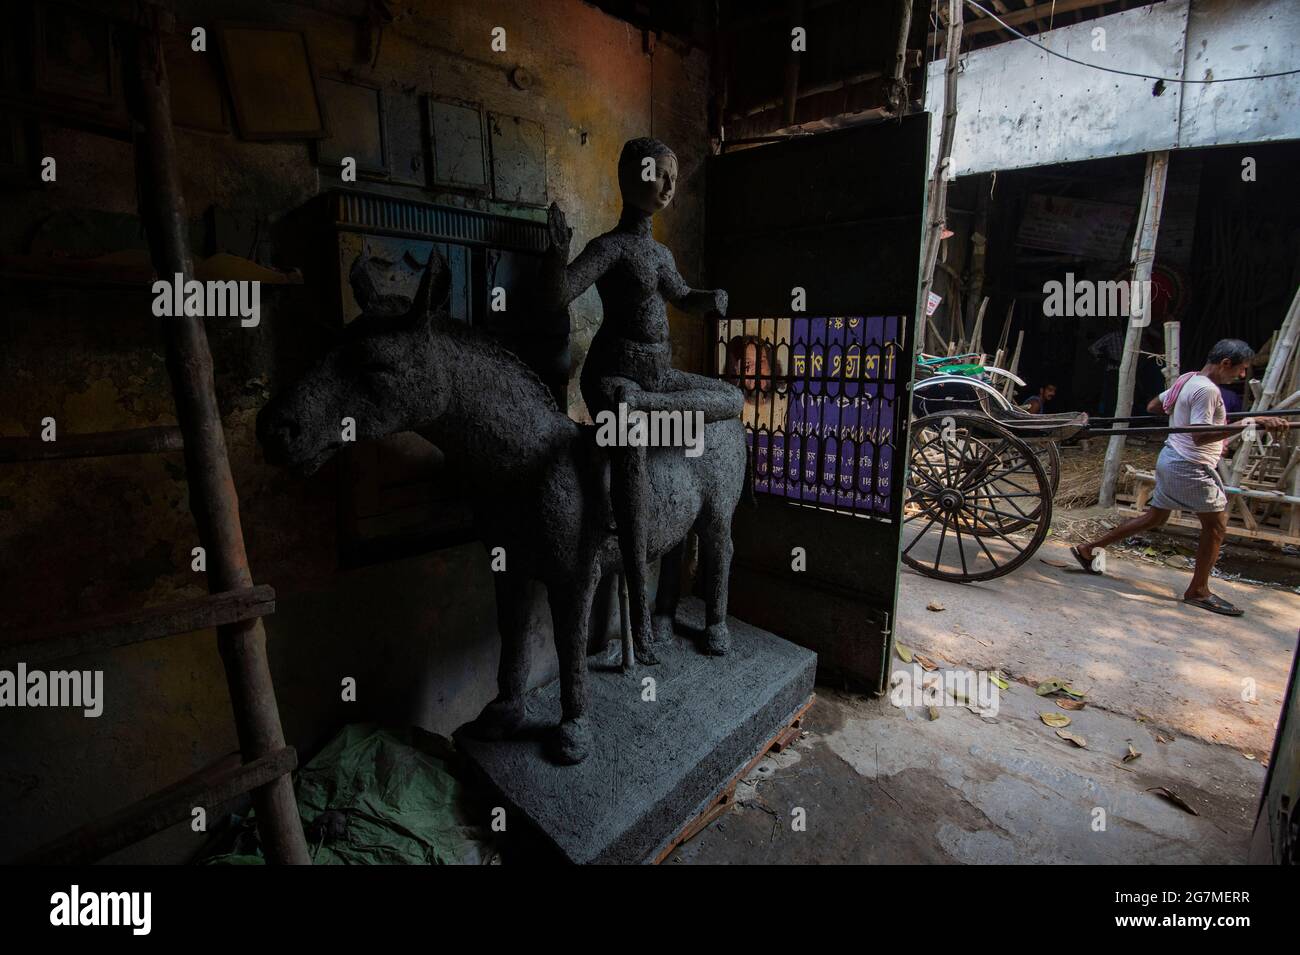 The settlement of Kumartuli - or 'potter locality' - lies besidethe Ganges in the older, northern part of Calcutta.Over 300 years old, today around 15 Stock Photo